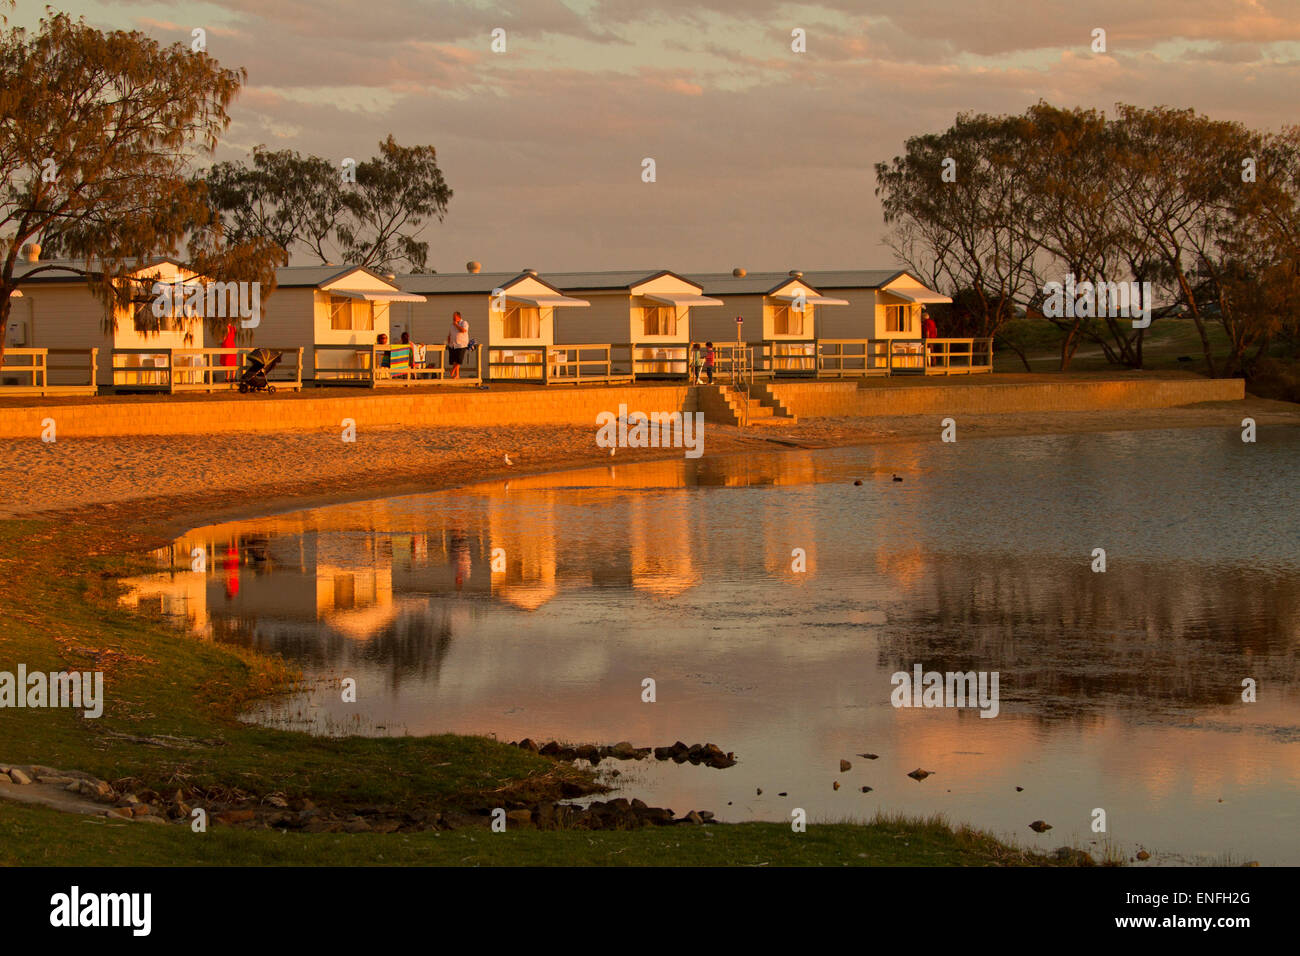 Waterfront holiday cabins by beach reflected in calm water of lake at sunset at Nambucca Heads NSW Australia Stock Photo